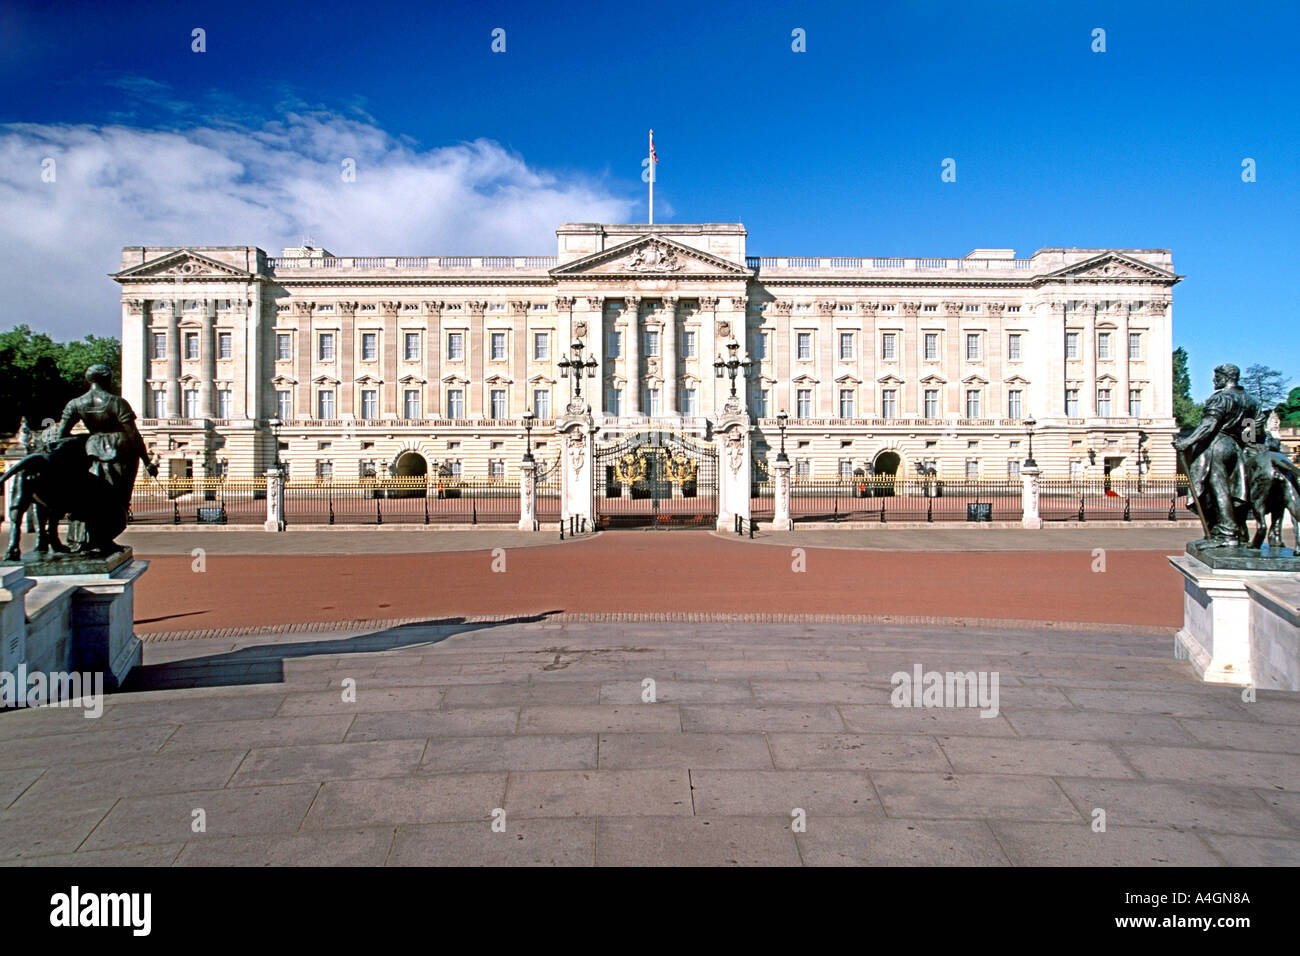 Buckingham Palace, one of the homes of the British Royal family in London. Stock Photo